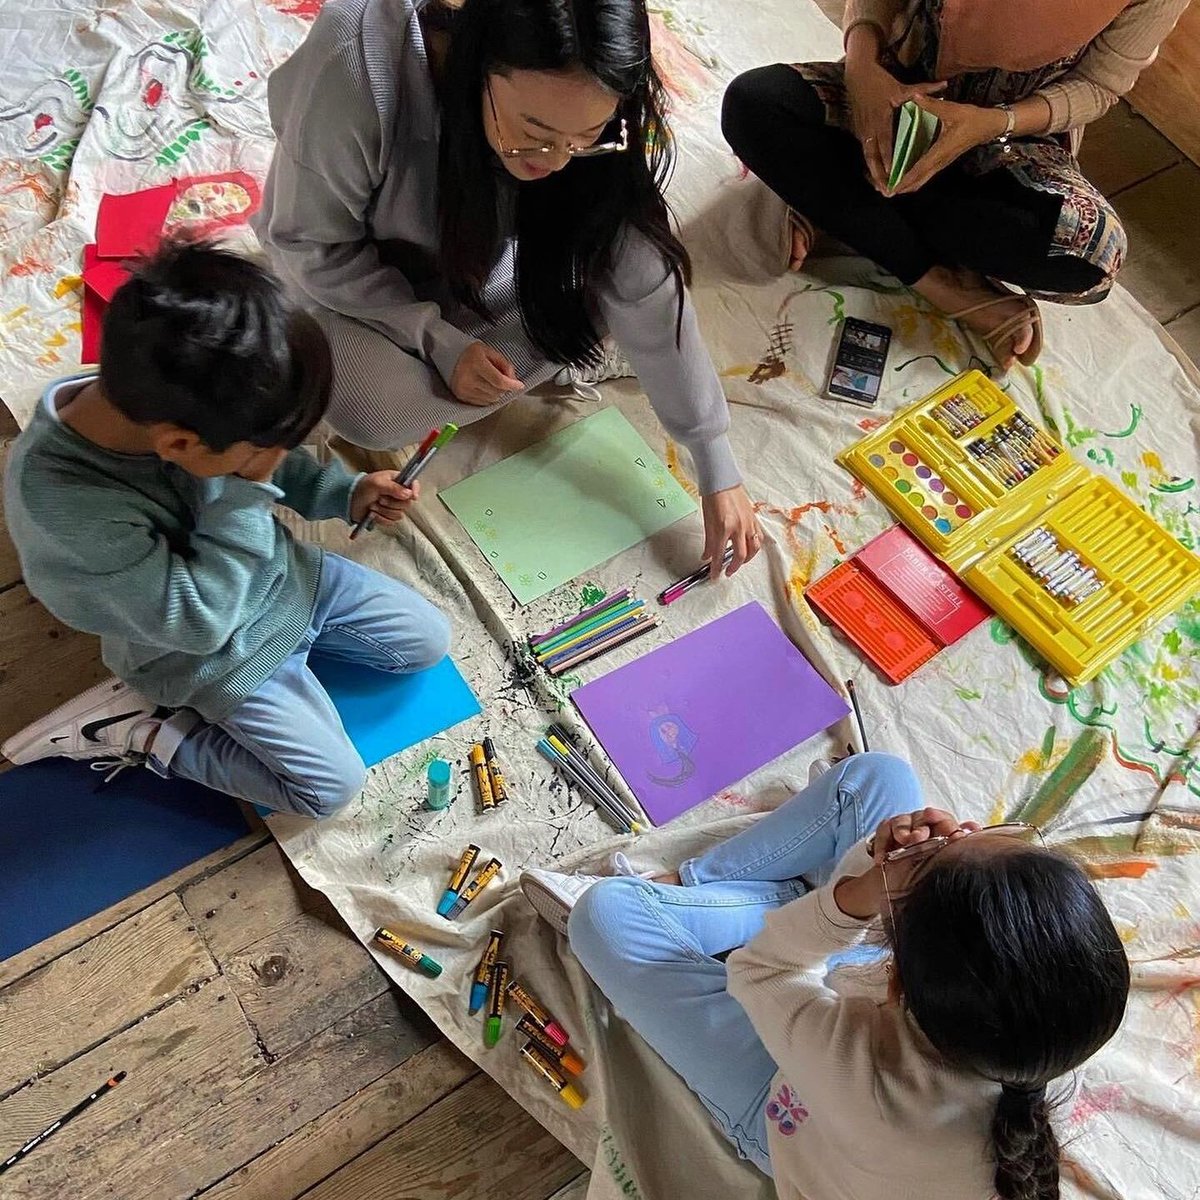 For #halfterm this week, we are hosting a pop-up with Coffee With Kids - a #community initiative that provides affordable & free childcare solutions for refugee parents. We're excited to welcome kids and families for #arts workshops & #creativeplay. @Oitijjo